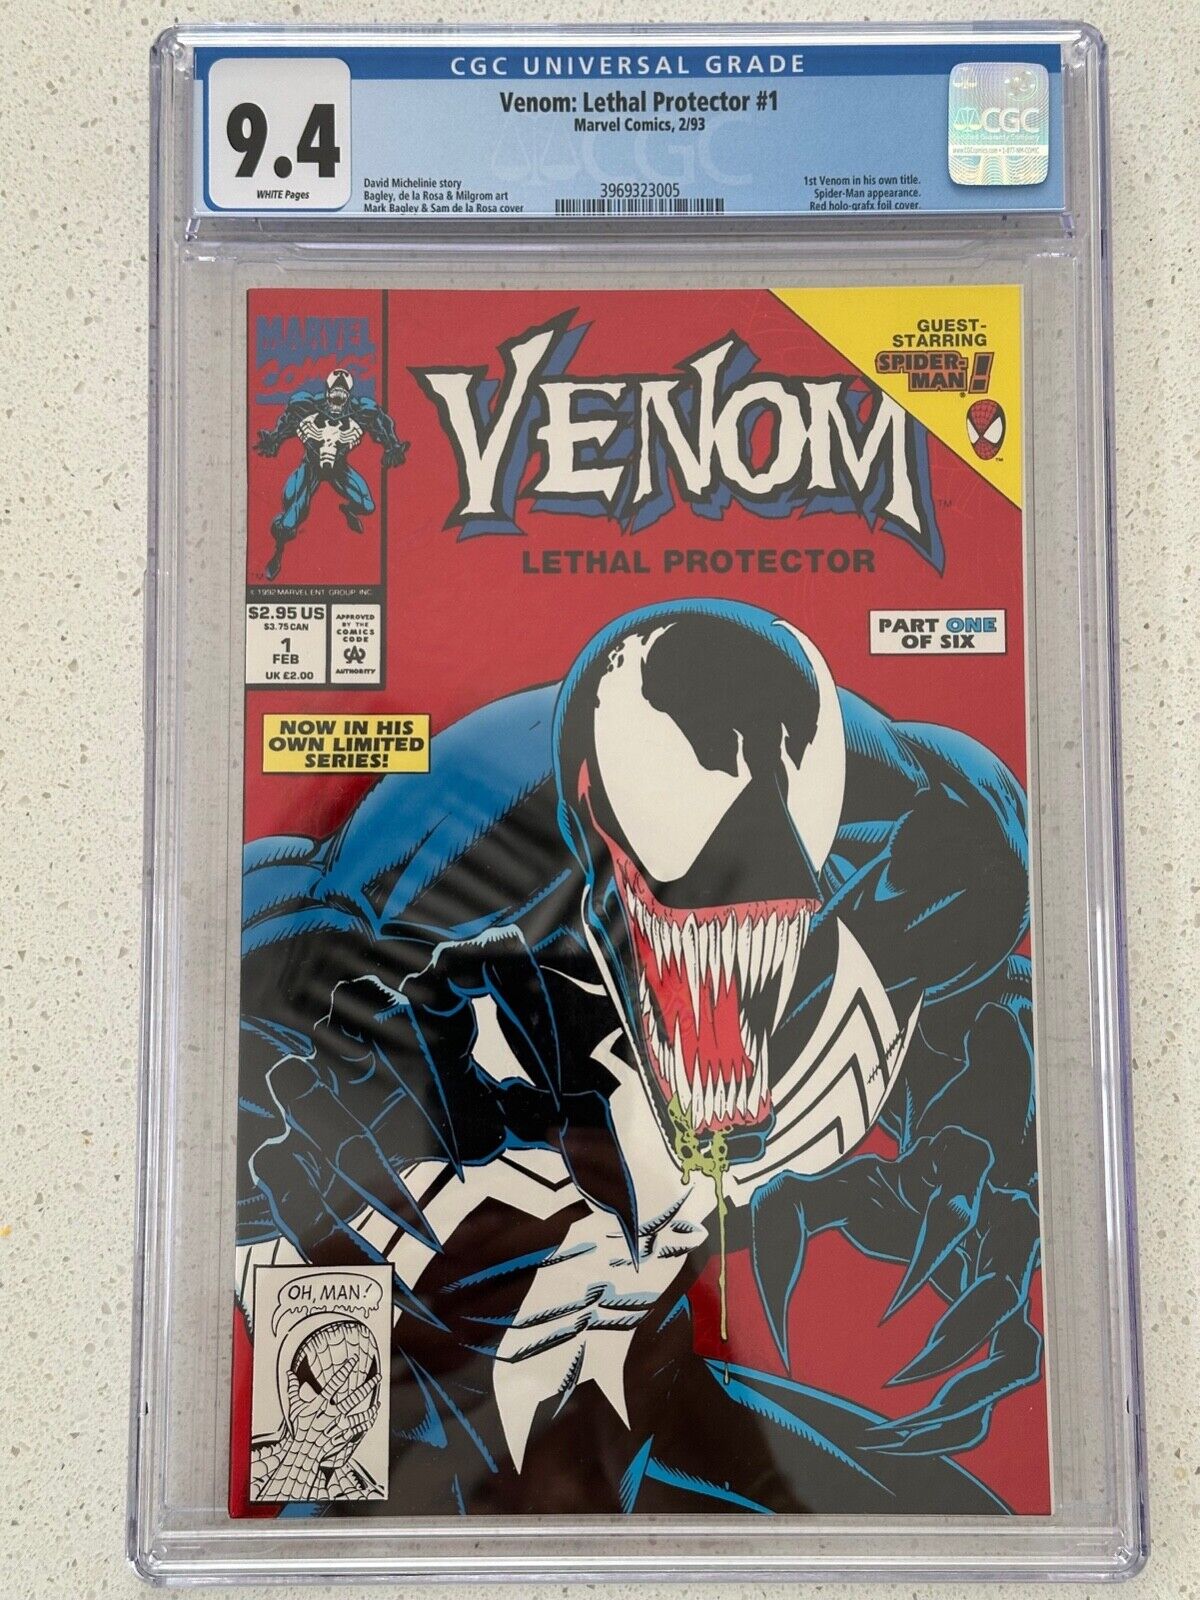 Venom Lethal Protector #1 CGC 9.4 White Pages Red Foil Cover